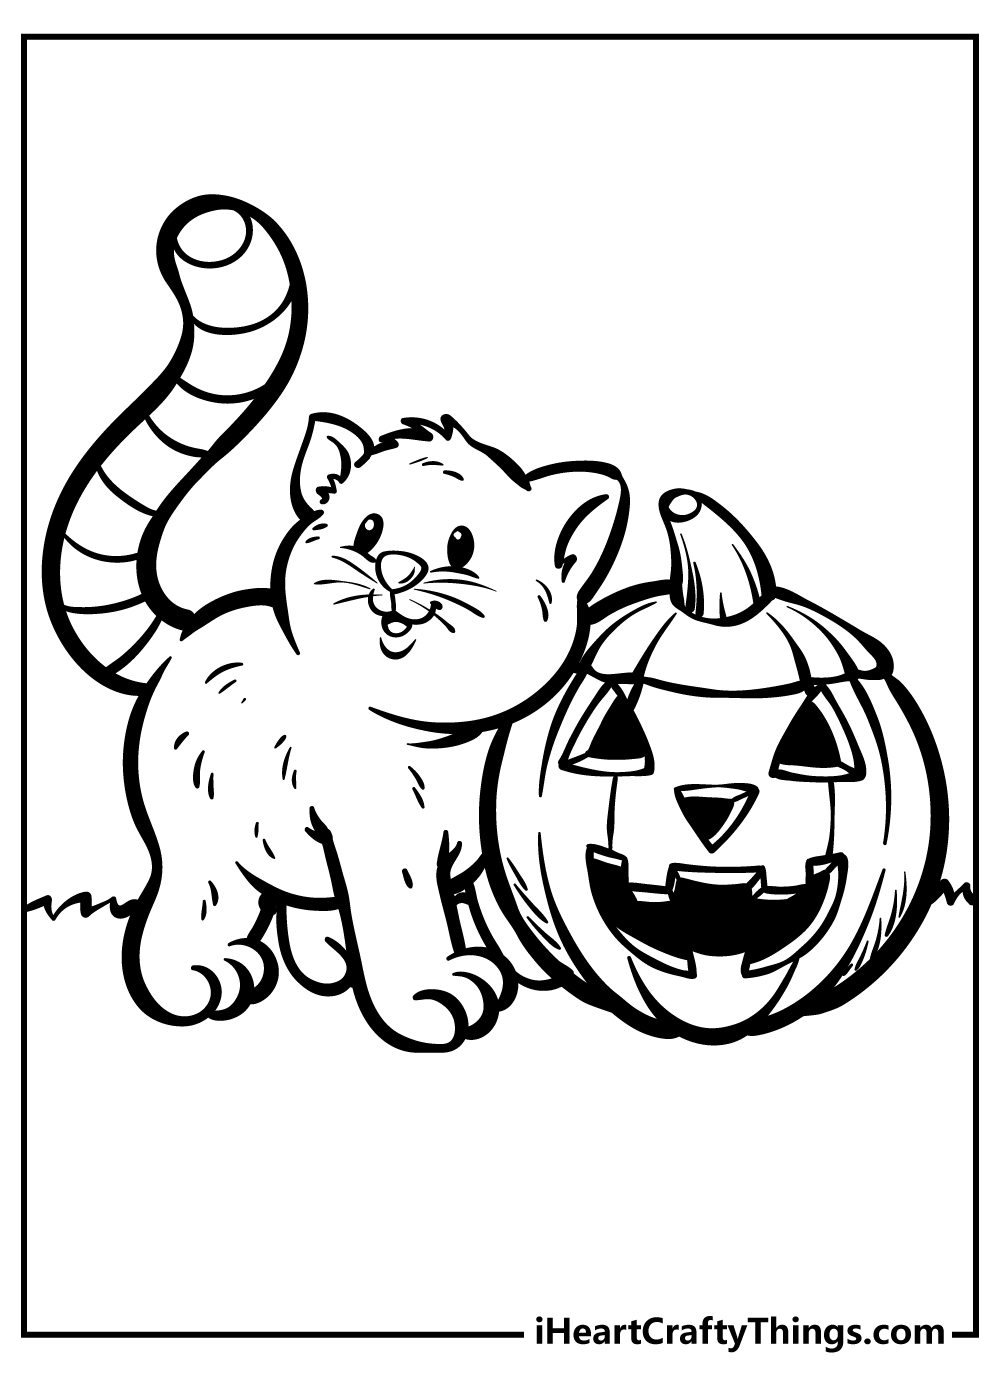 Halloween Coloring Pages for preschoolers free printable